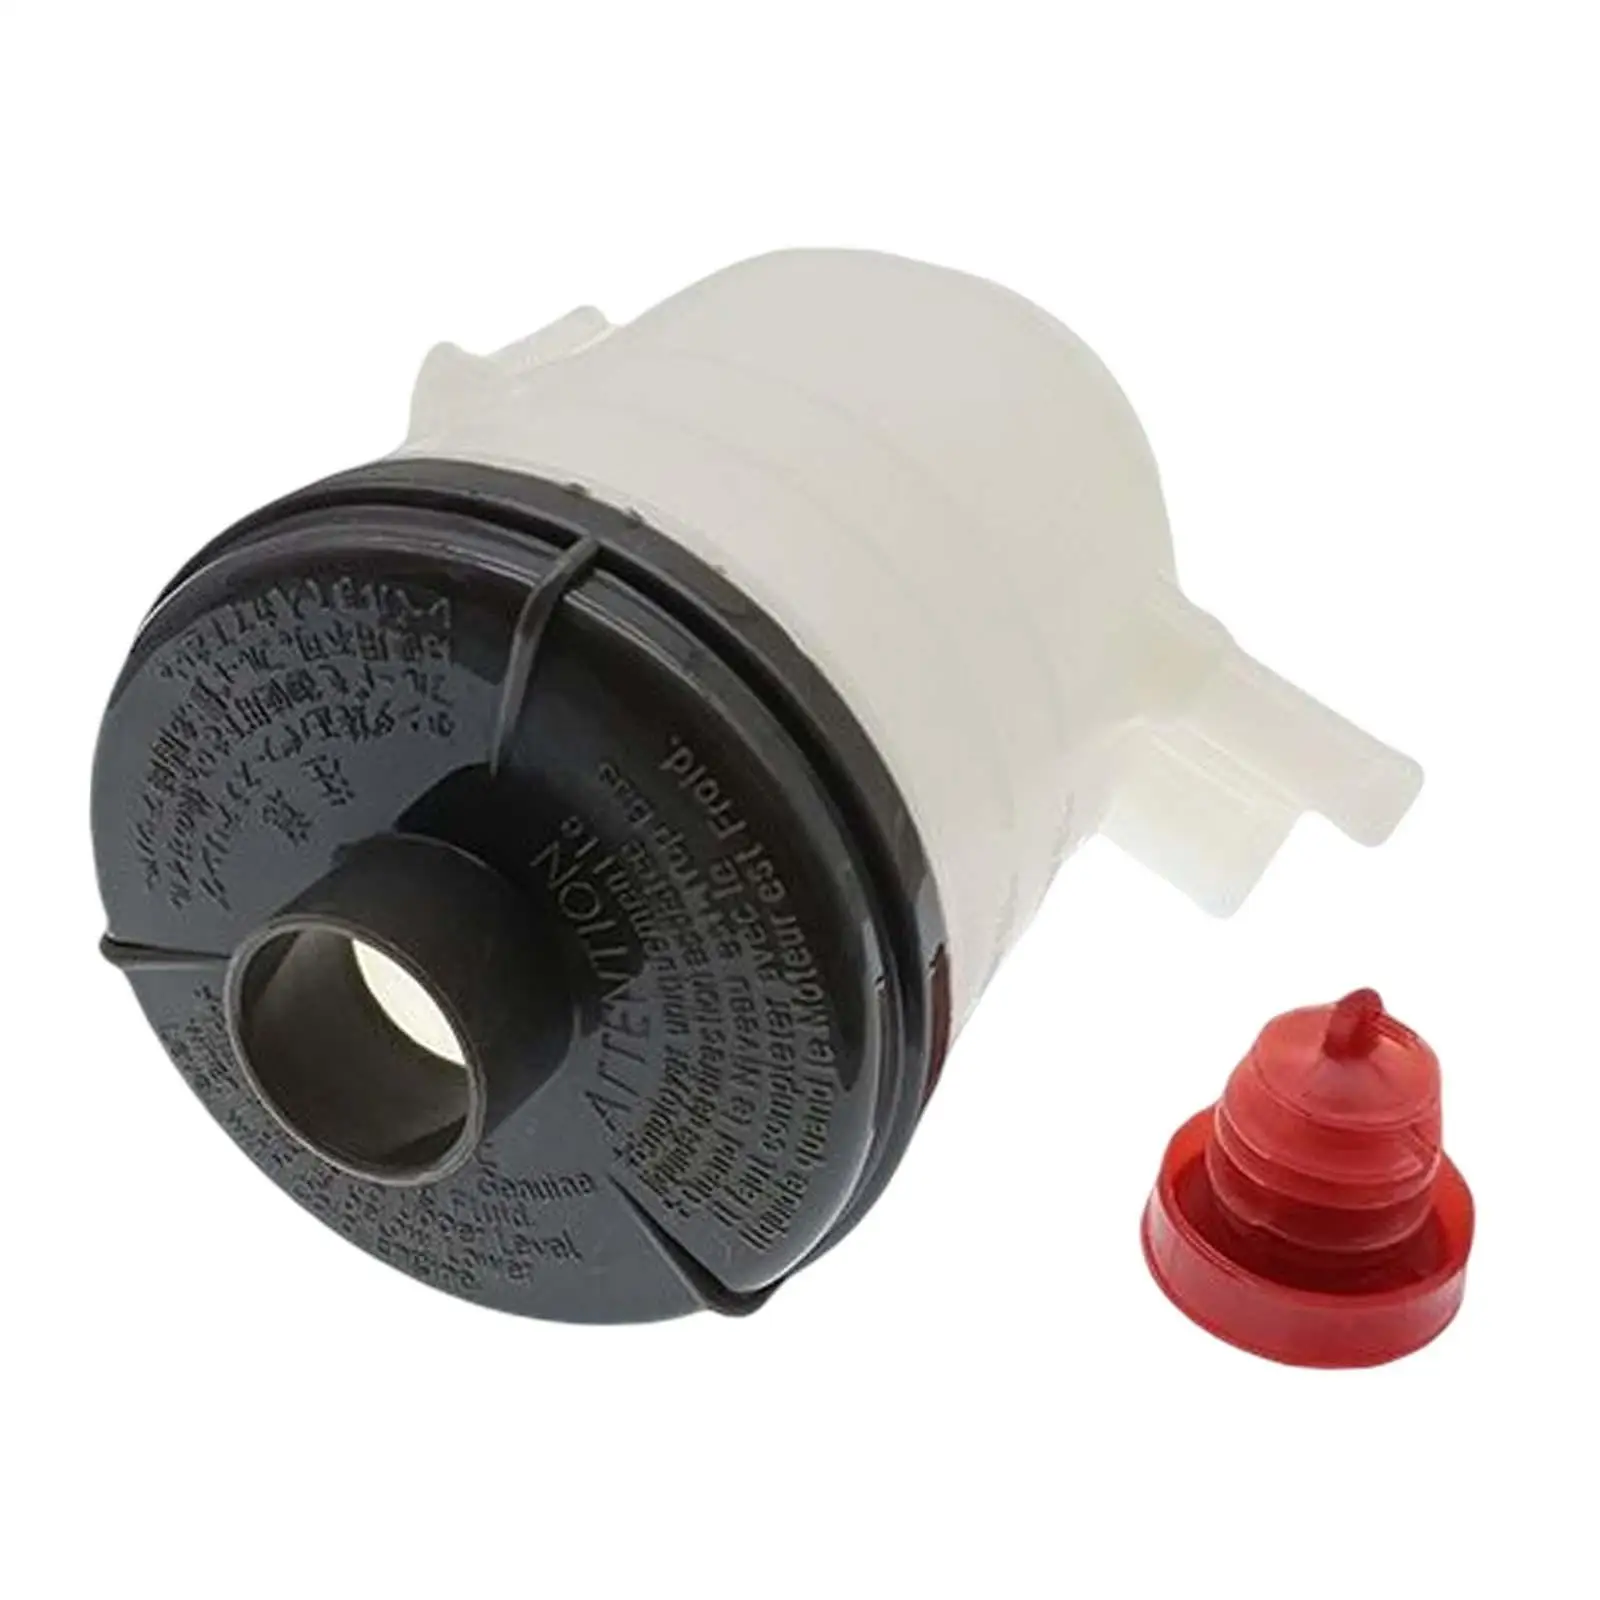 

Booster Pump Oil Cup Replaces Portable Spare Parts Accessories premium Steering Pump Reservoir for Honda Accord 98-02